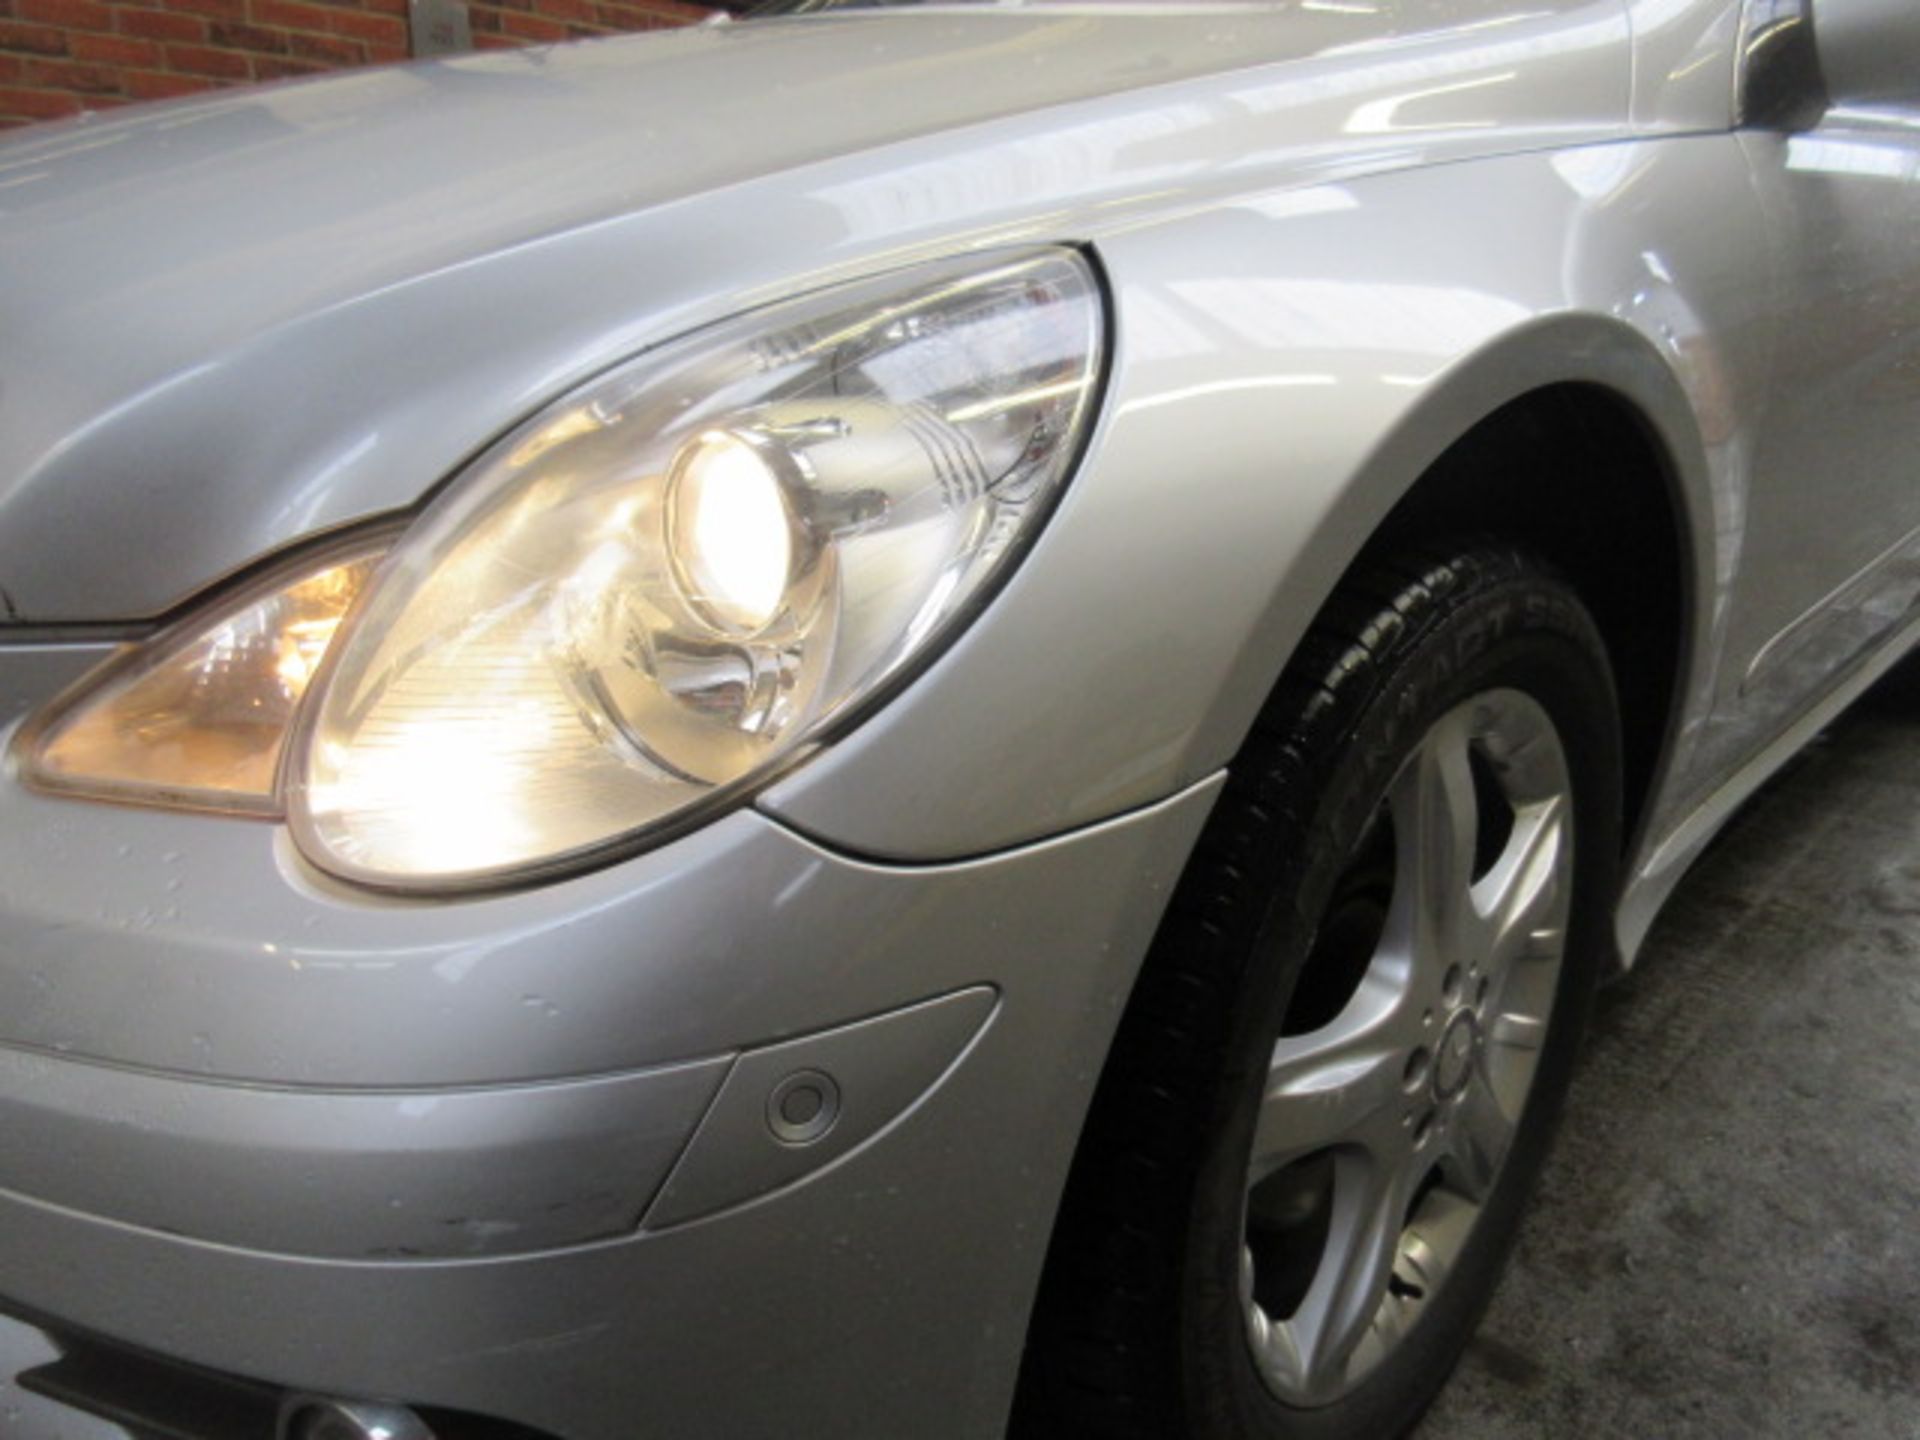 08 08 Mercedes R320 Sport CDI A - Image 12 of 30